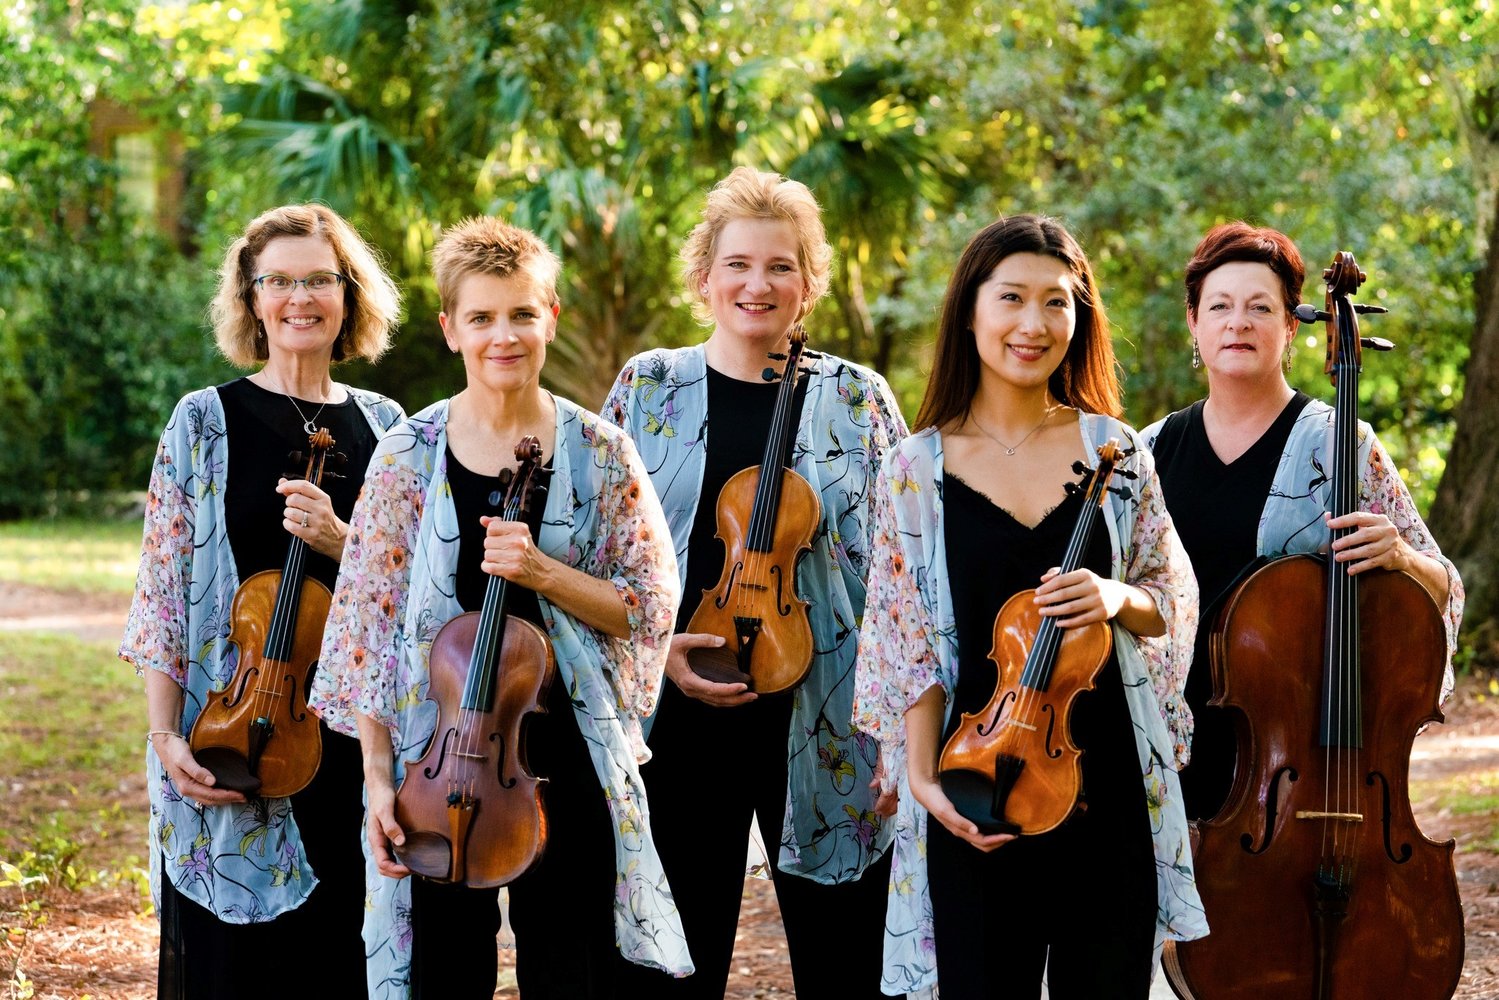 Pictured from left are: Ann Hertler, Susan Pardue, Patrice Evans, Siyu Zhang and Laurie Casseday.